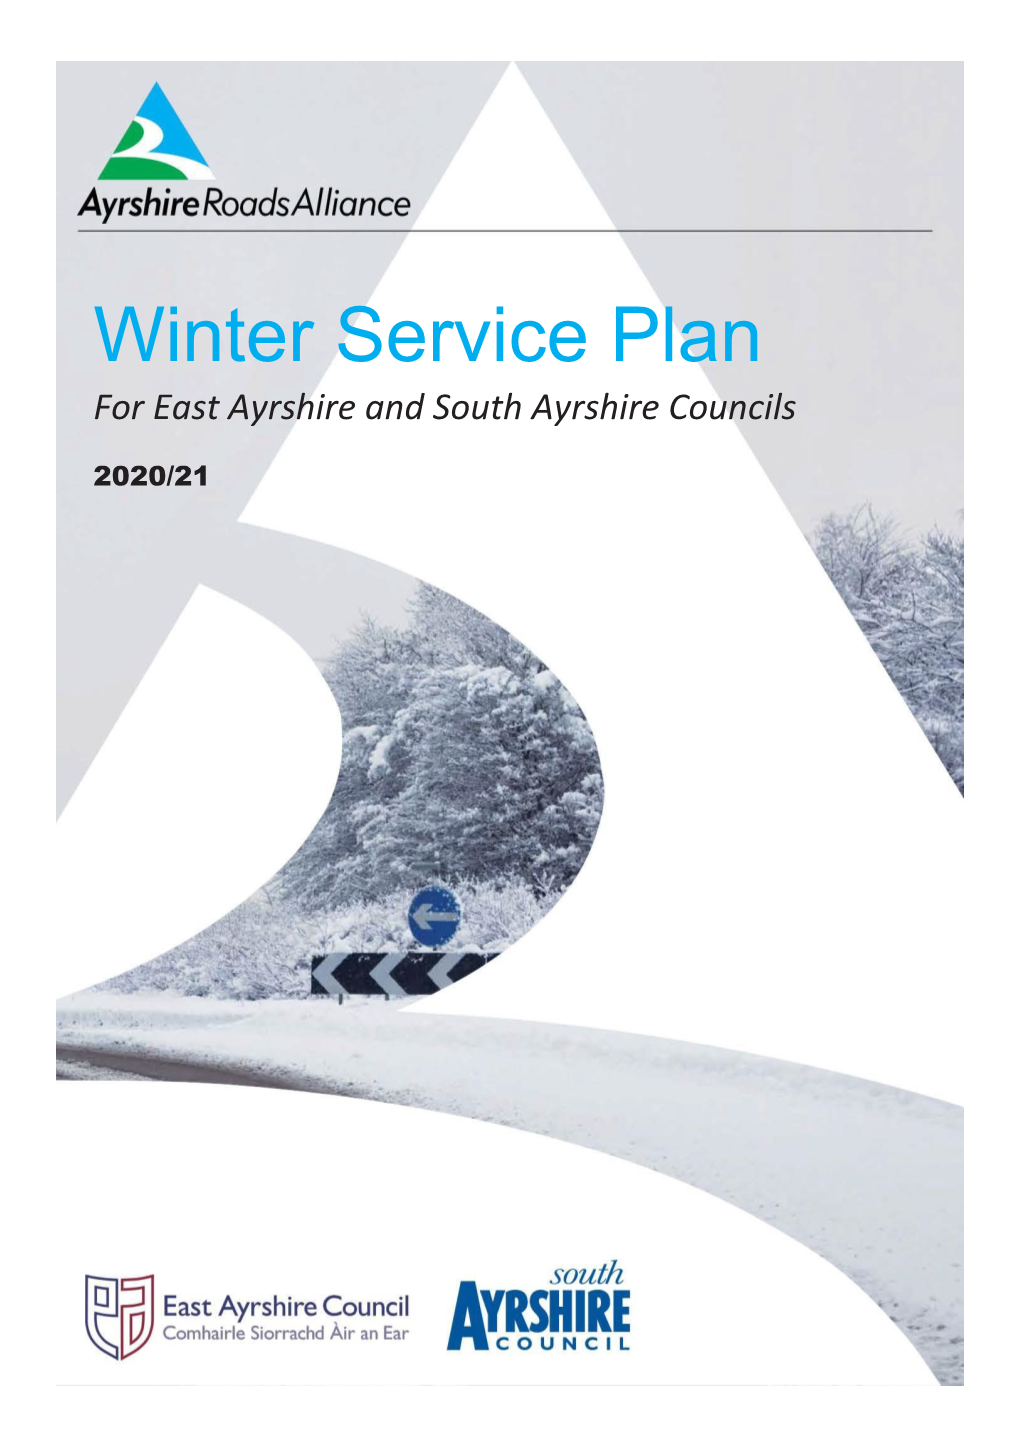 Winter Service Plan for East Ayrshire and South Ayrshire Councils